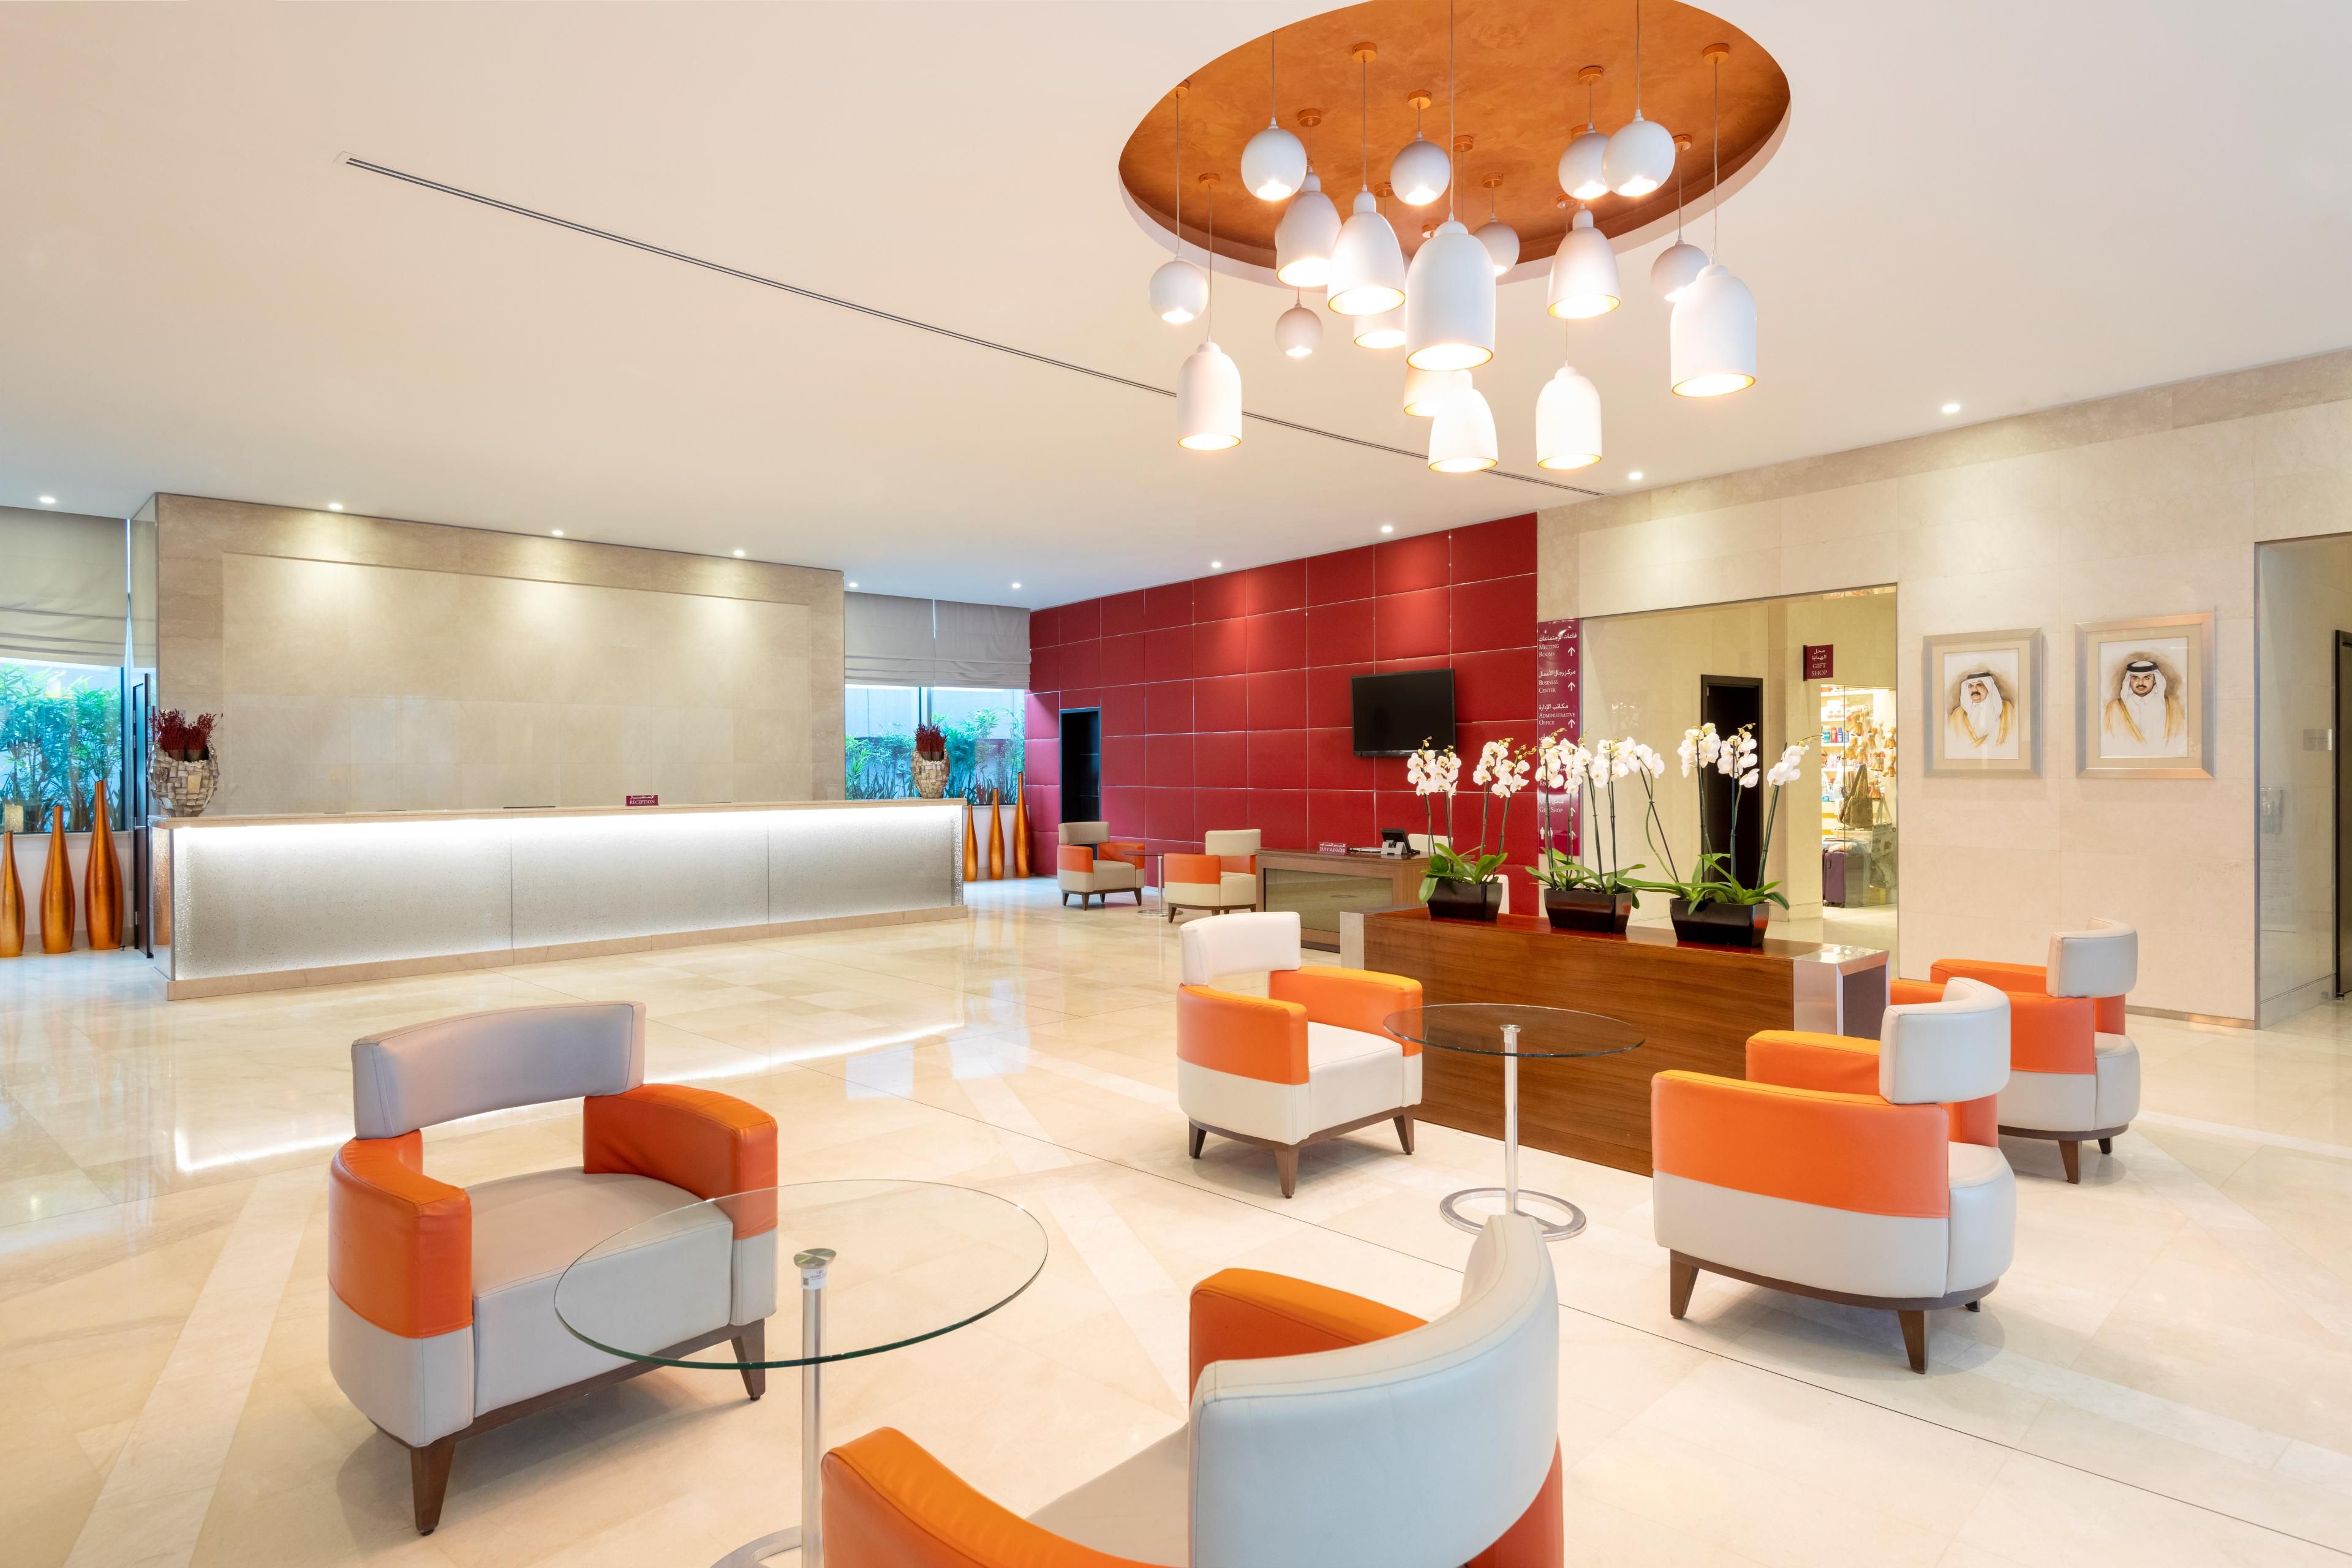 Our modern lobby entrance welcomes guests to the hotel